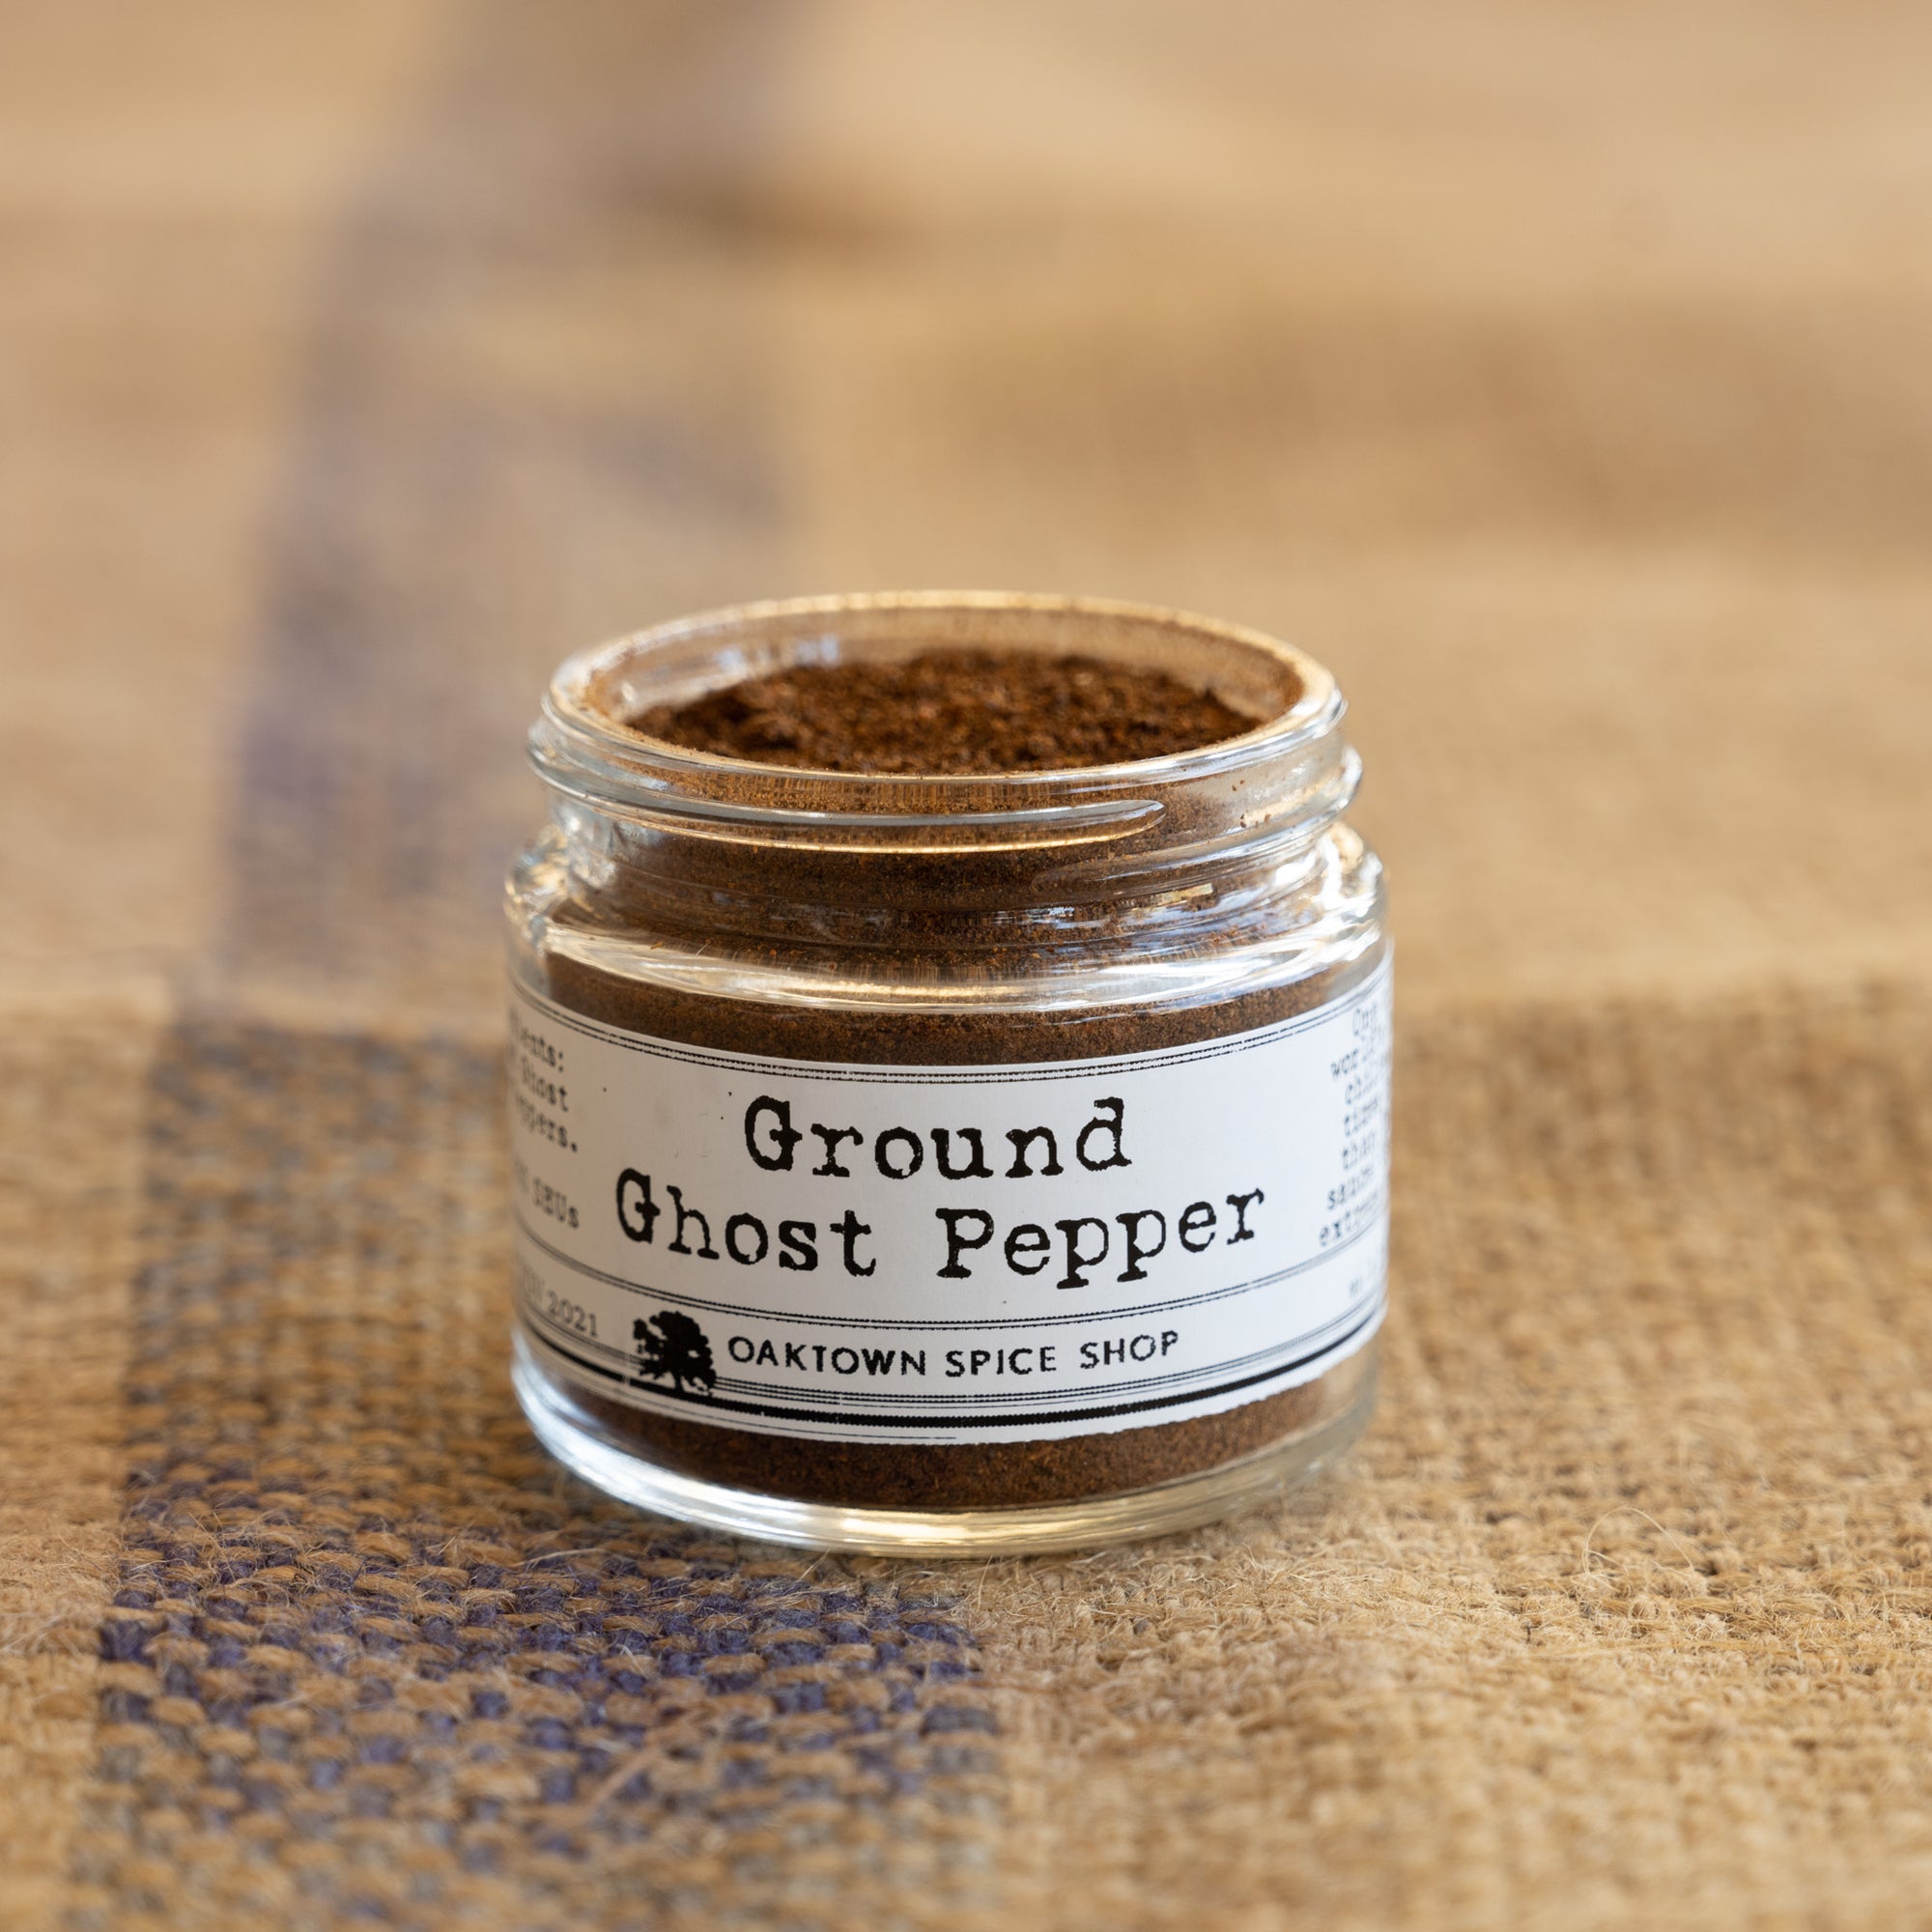 Ground Ghost Pepper by Oaktown Spice Shop. This exceptionally hot ground chile pepper is for the true heat-seeker. The ghost pepper, also known as Bhut Jolokia, was at one time ranked the world's hottest chile in the Guiness Book of World Records 2007.